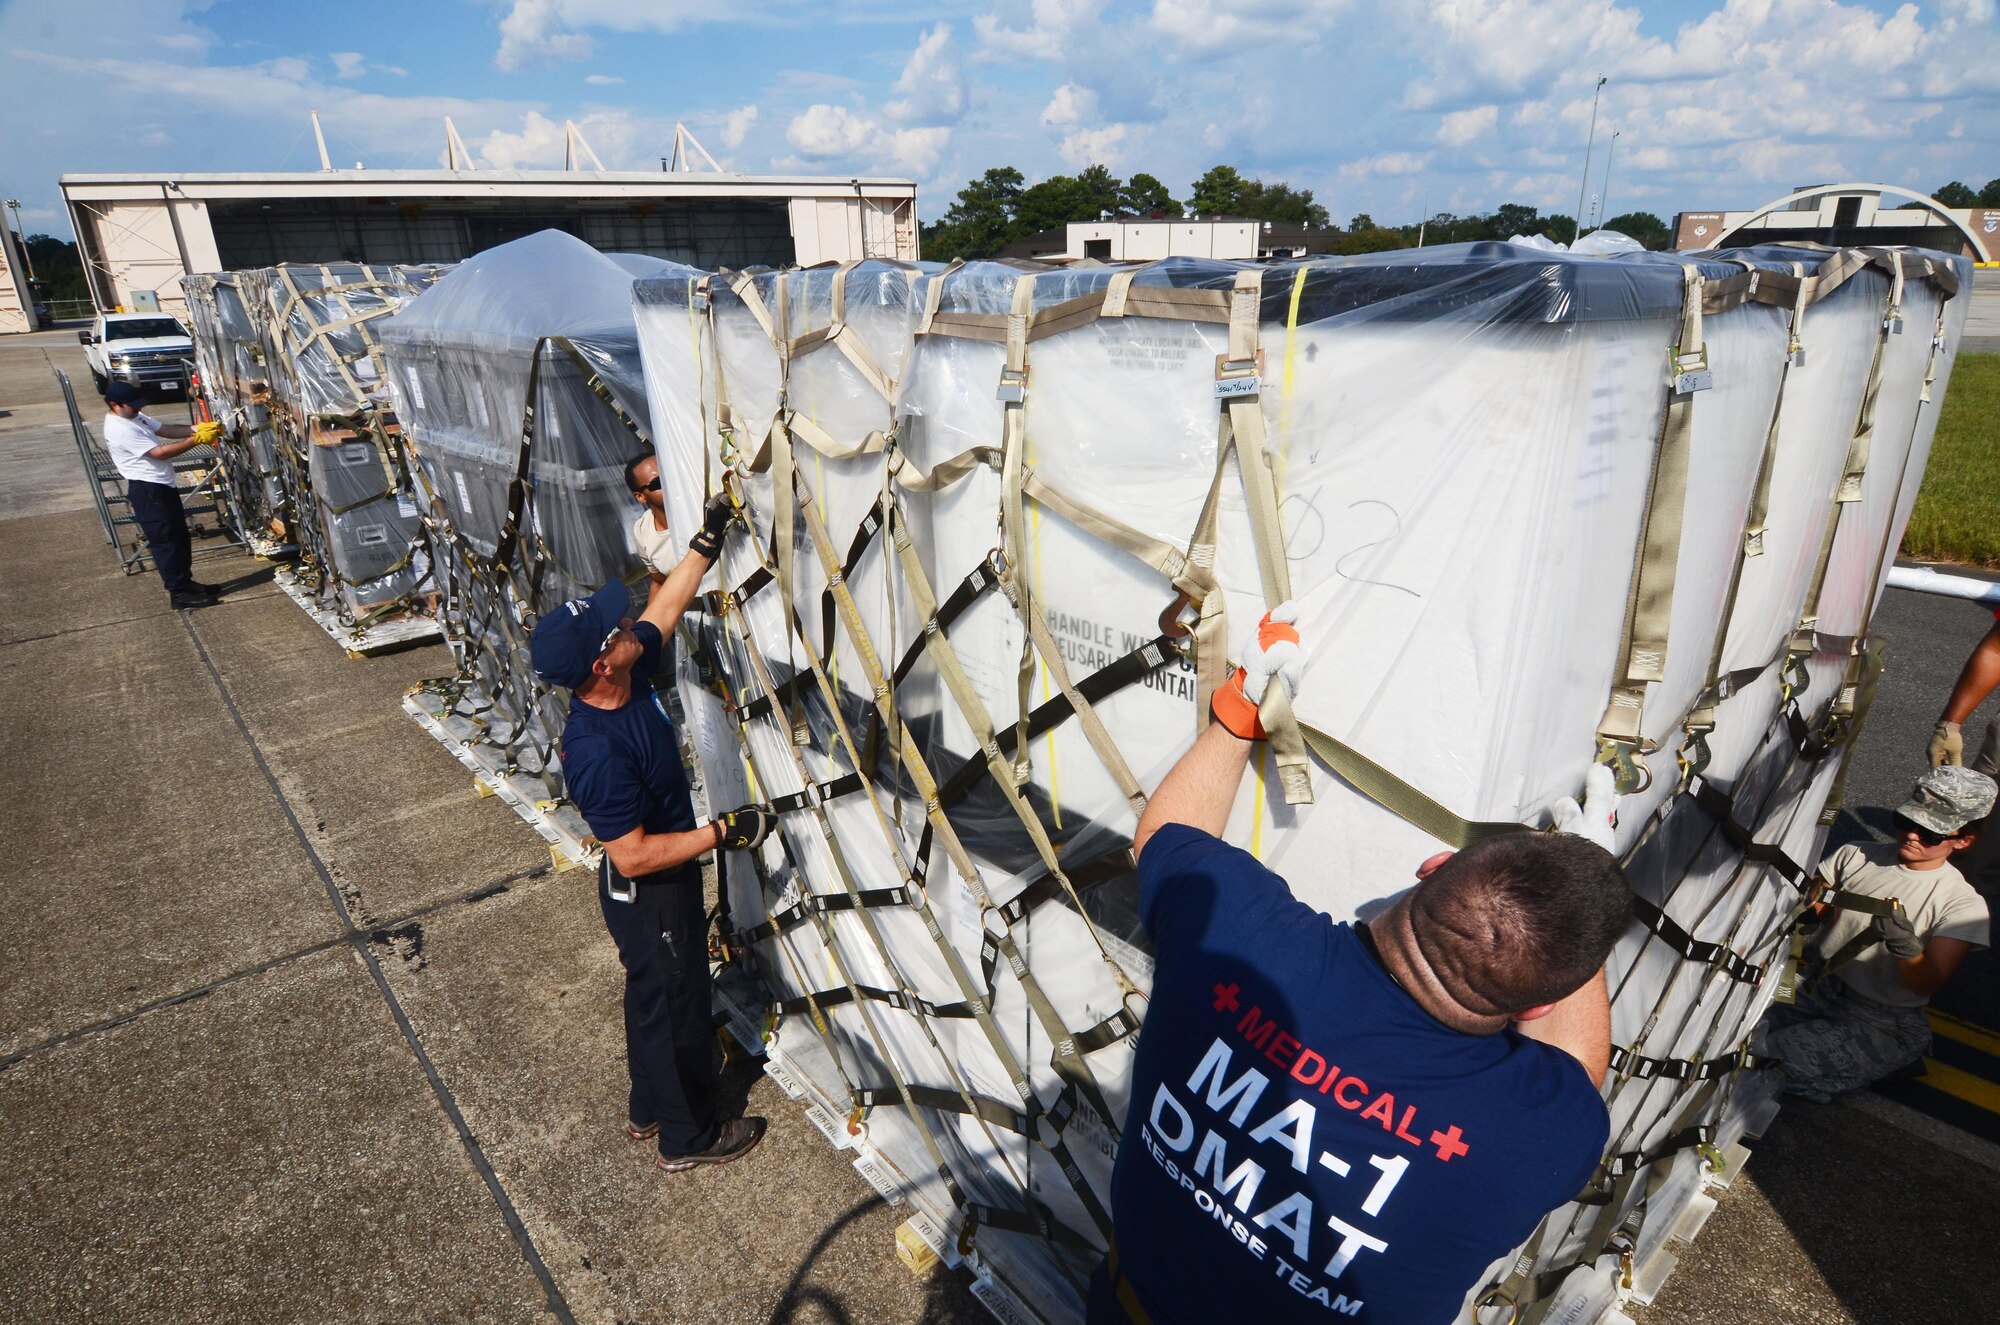 Disaster Medical Assistance Team members secure a cargo net around a pallet of medical supplies on the flightline at Dobbins Air Reserve Base, Ga. Sept. 21, 2017. The DMAT is a federalized workforce of doctors, nurses, paramedics, emergency management technicians, safety, and others who provide medical care during natural disaster relief efforts. (U.S. Air Force photo/Don Peek)